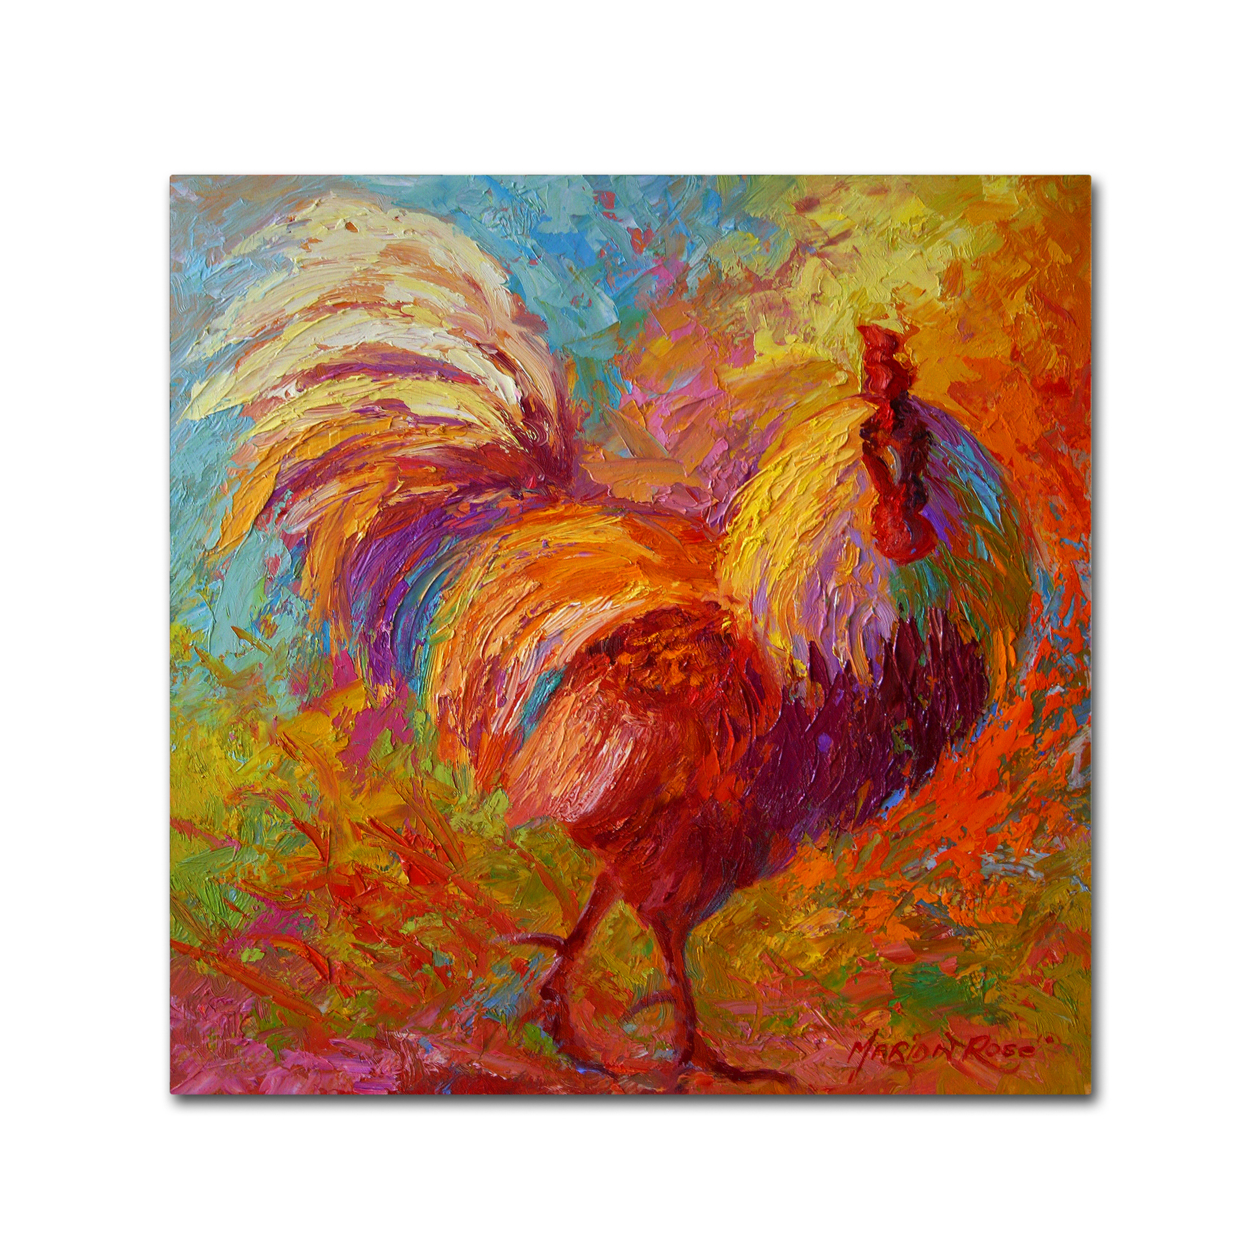 Marion Rose 'Rooster 6' Ready To Hang Canvas Art 18 X 18 Inches Made In USA